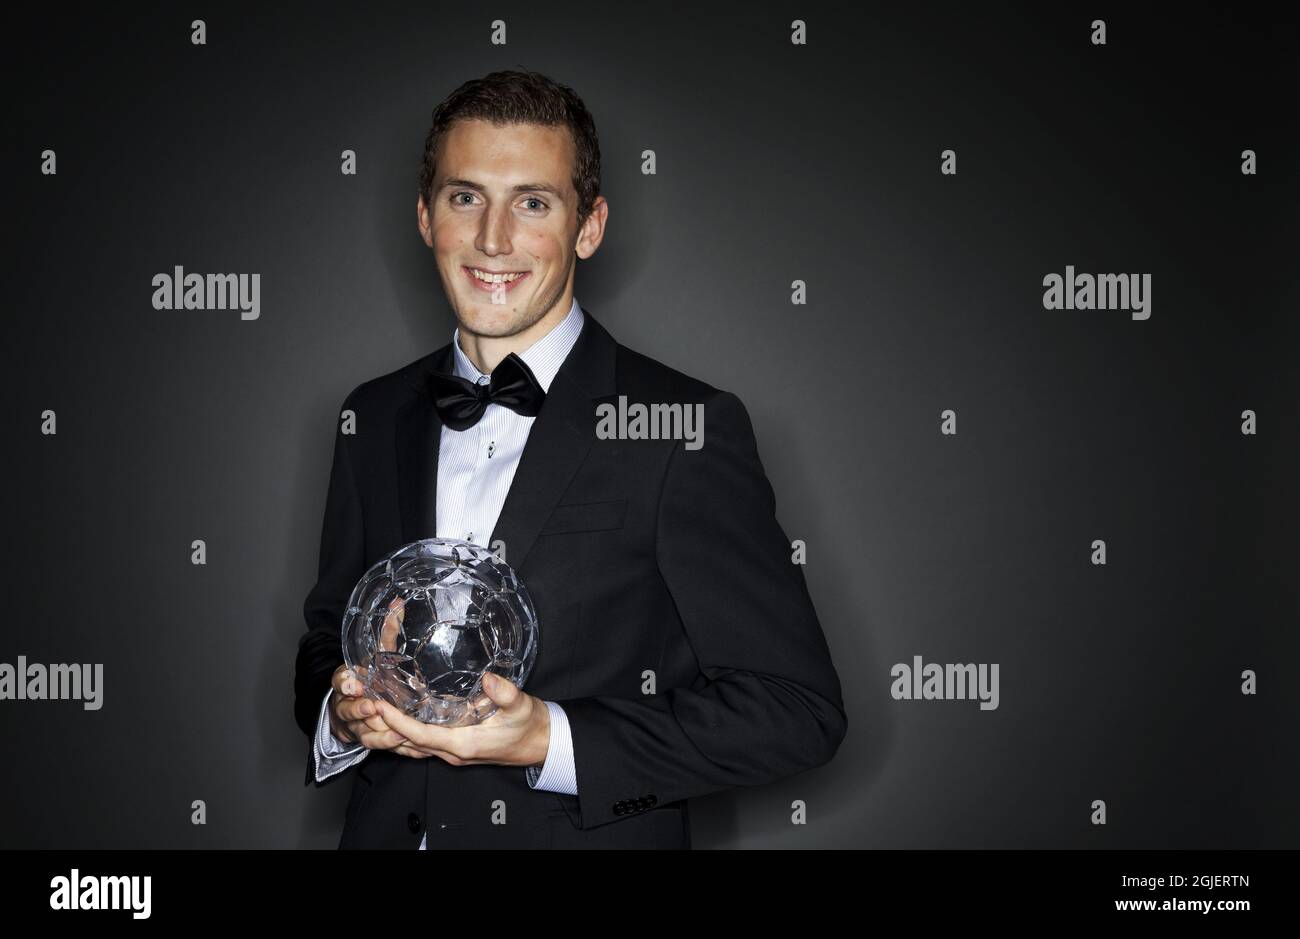 Alexander Gerndt of Helsingborgs IF with his award for goal scorer and player of the year. Stock Photo